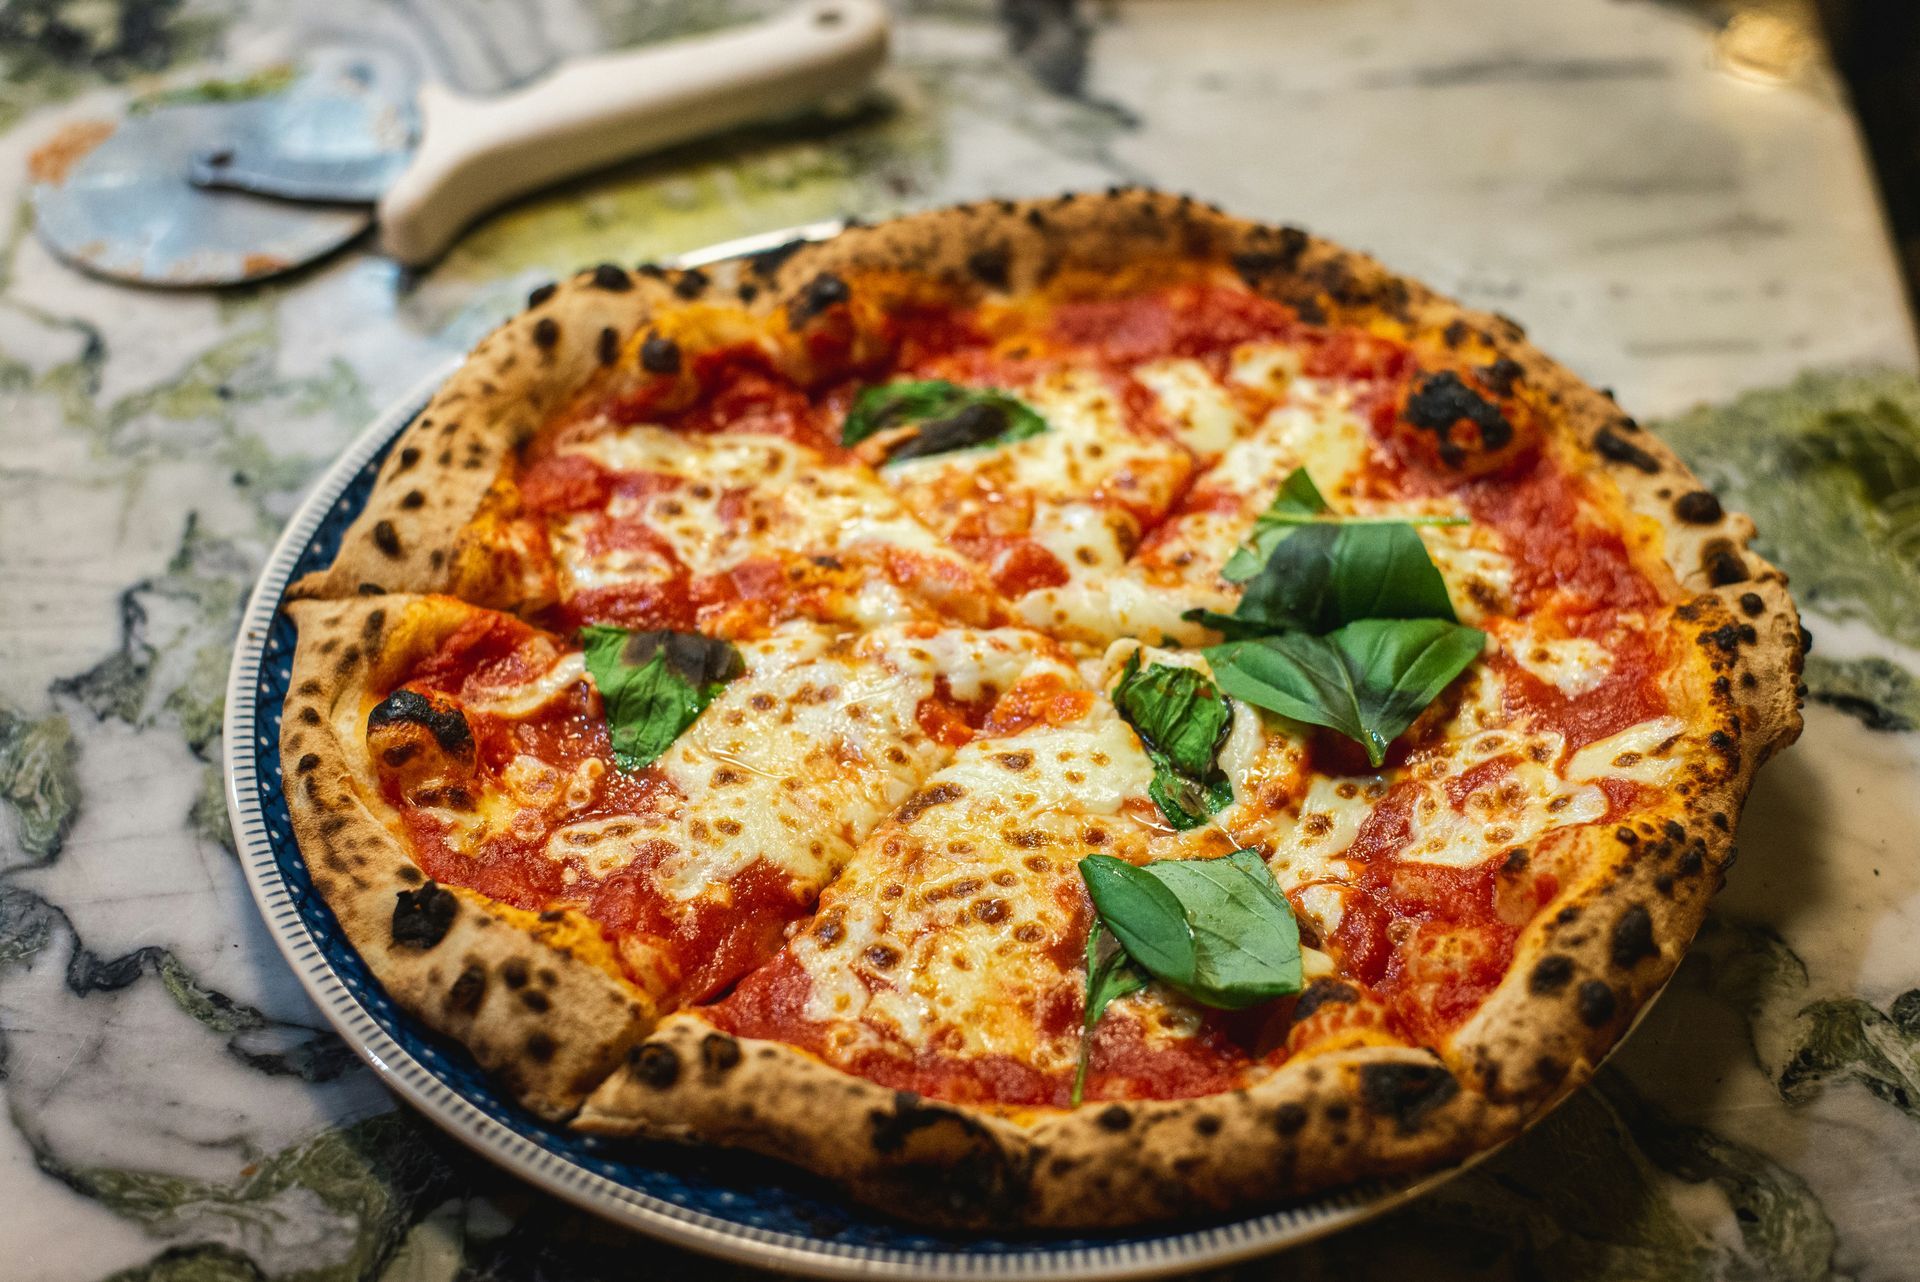 Margherita pizza with a charred crust, melted mozzarella, and fresh basil